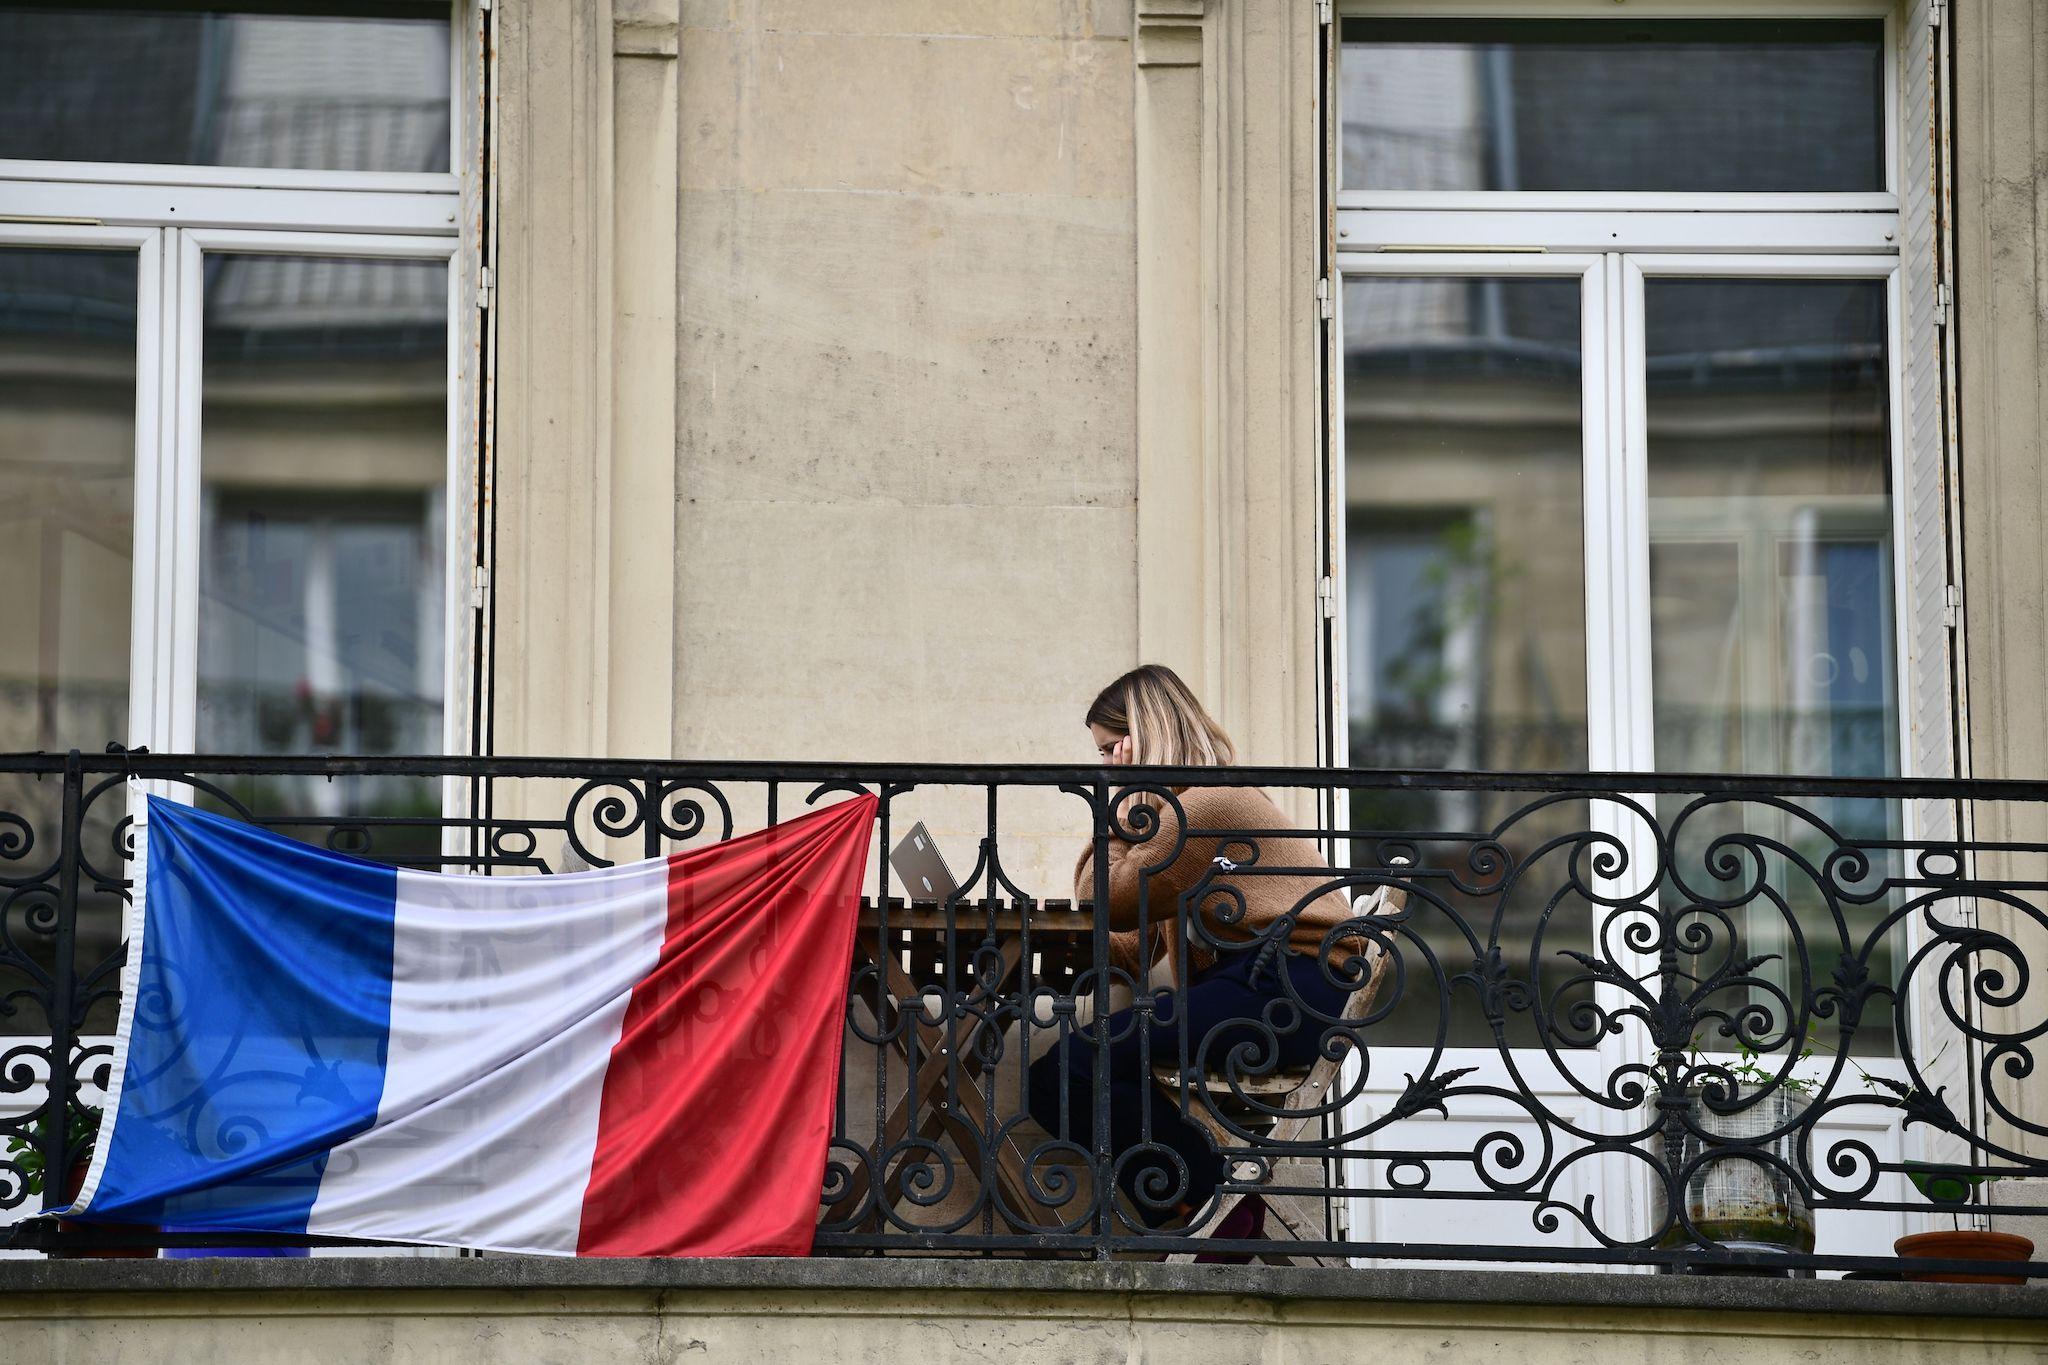 A woman sits on her balcony looking at her laptop in Paris on April 17, 2020, on the 32nd day of a lockdown across France aimed at curbing the spread of the COVID-19 pandemic, caused by the novel coronavirus